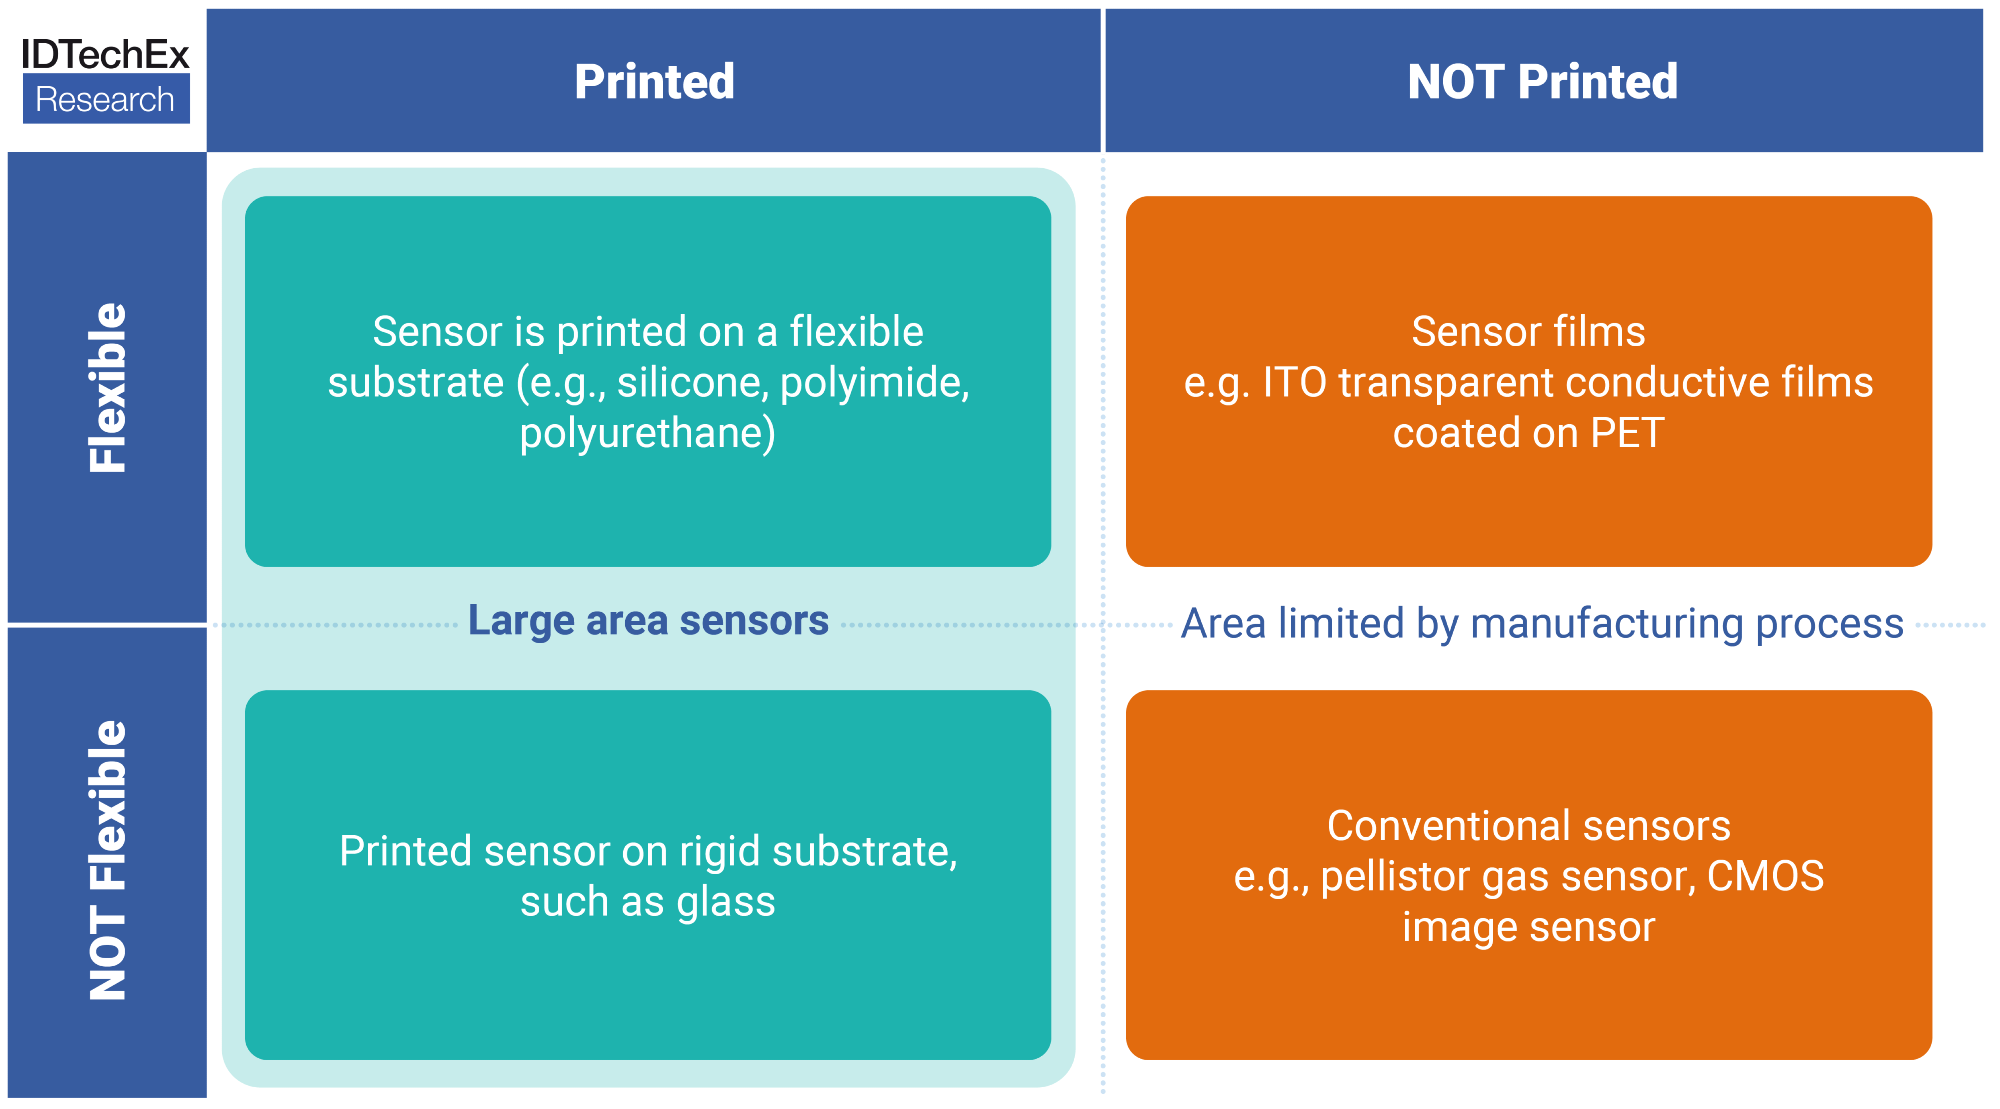 IDTechEx Discusses the Role of Printed Sensors in Mass-Digitization